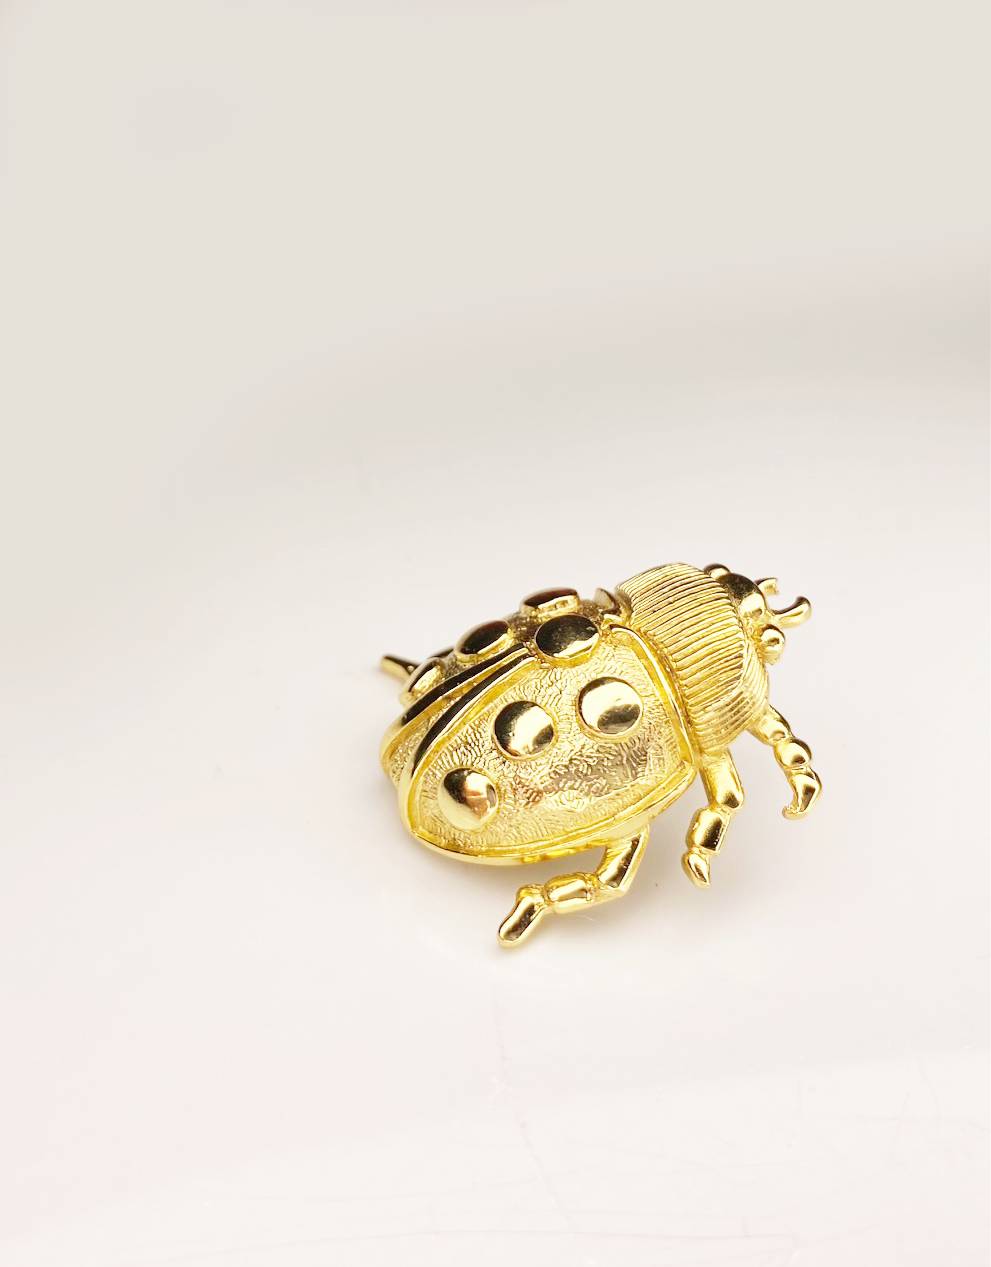 1980s Christian Dior Ladybird Gold Plated Vintage Pin Brooch - style - CHNGR